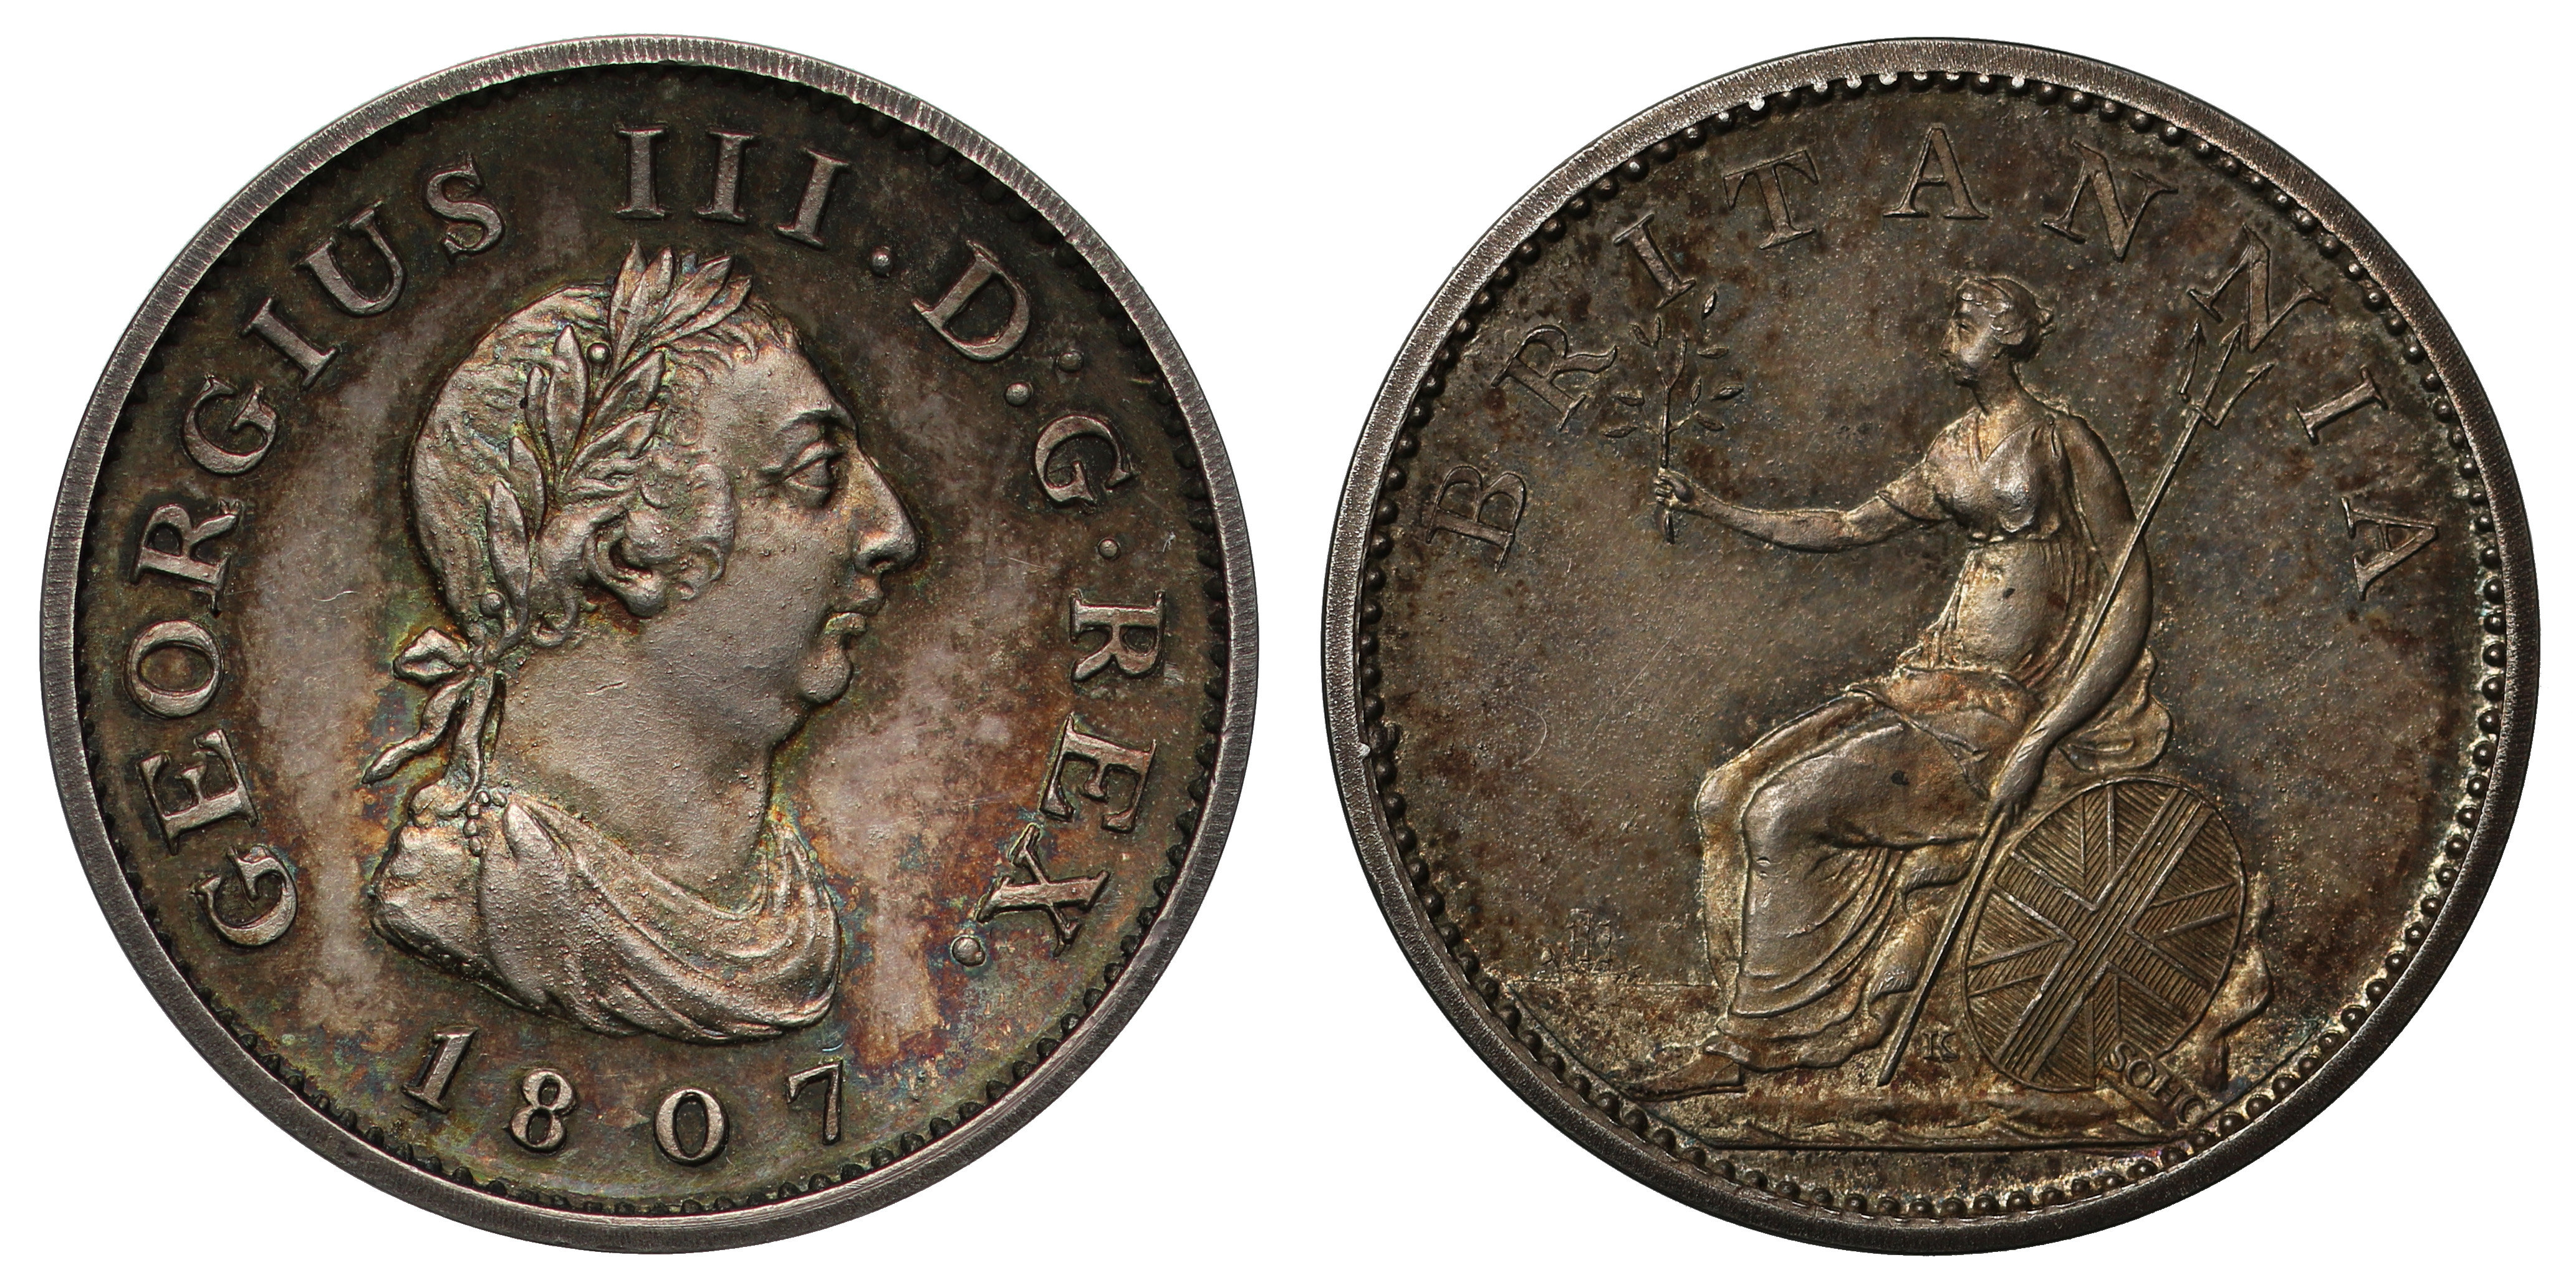 George III (1760-1820), Restrike silver Pattern Farthing, 1807, by W J Taylor, larger laureate and